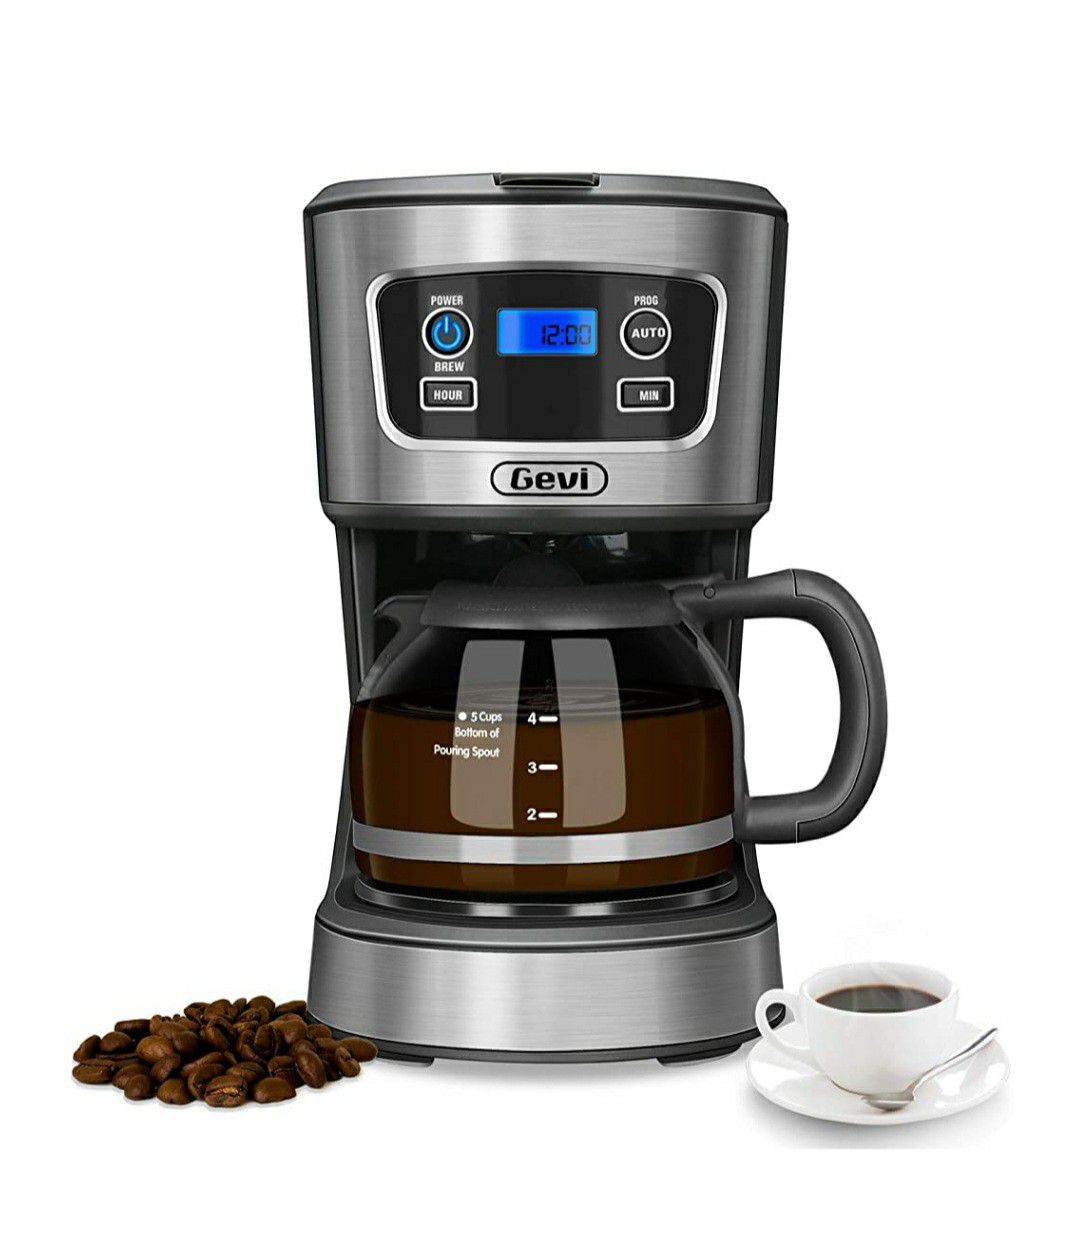 Programmable Brew Coffee Machine with Glass Carafe Pot, 5 Cup Coffee Maker